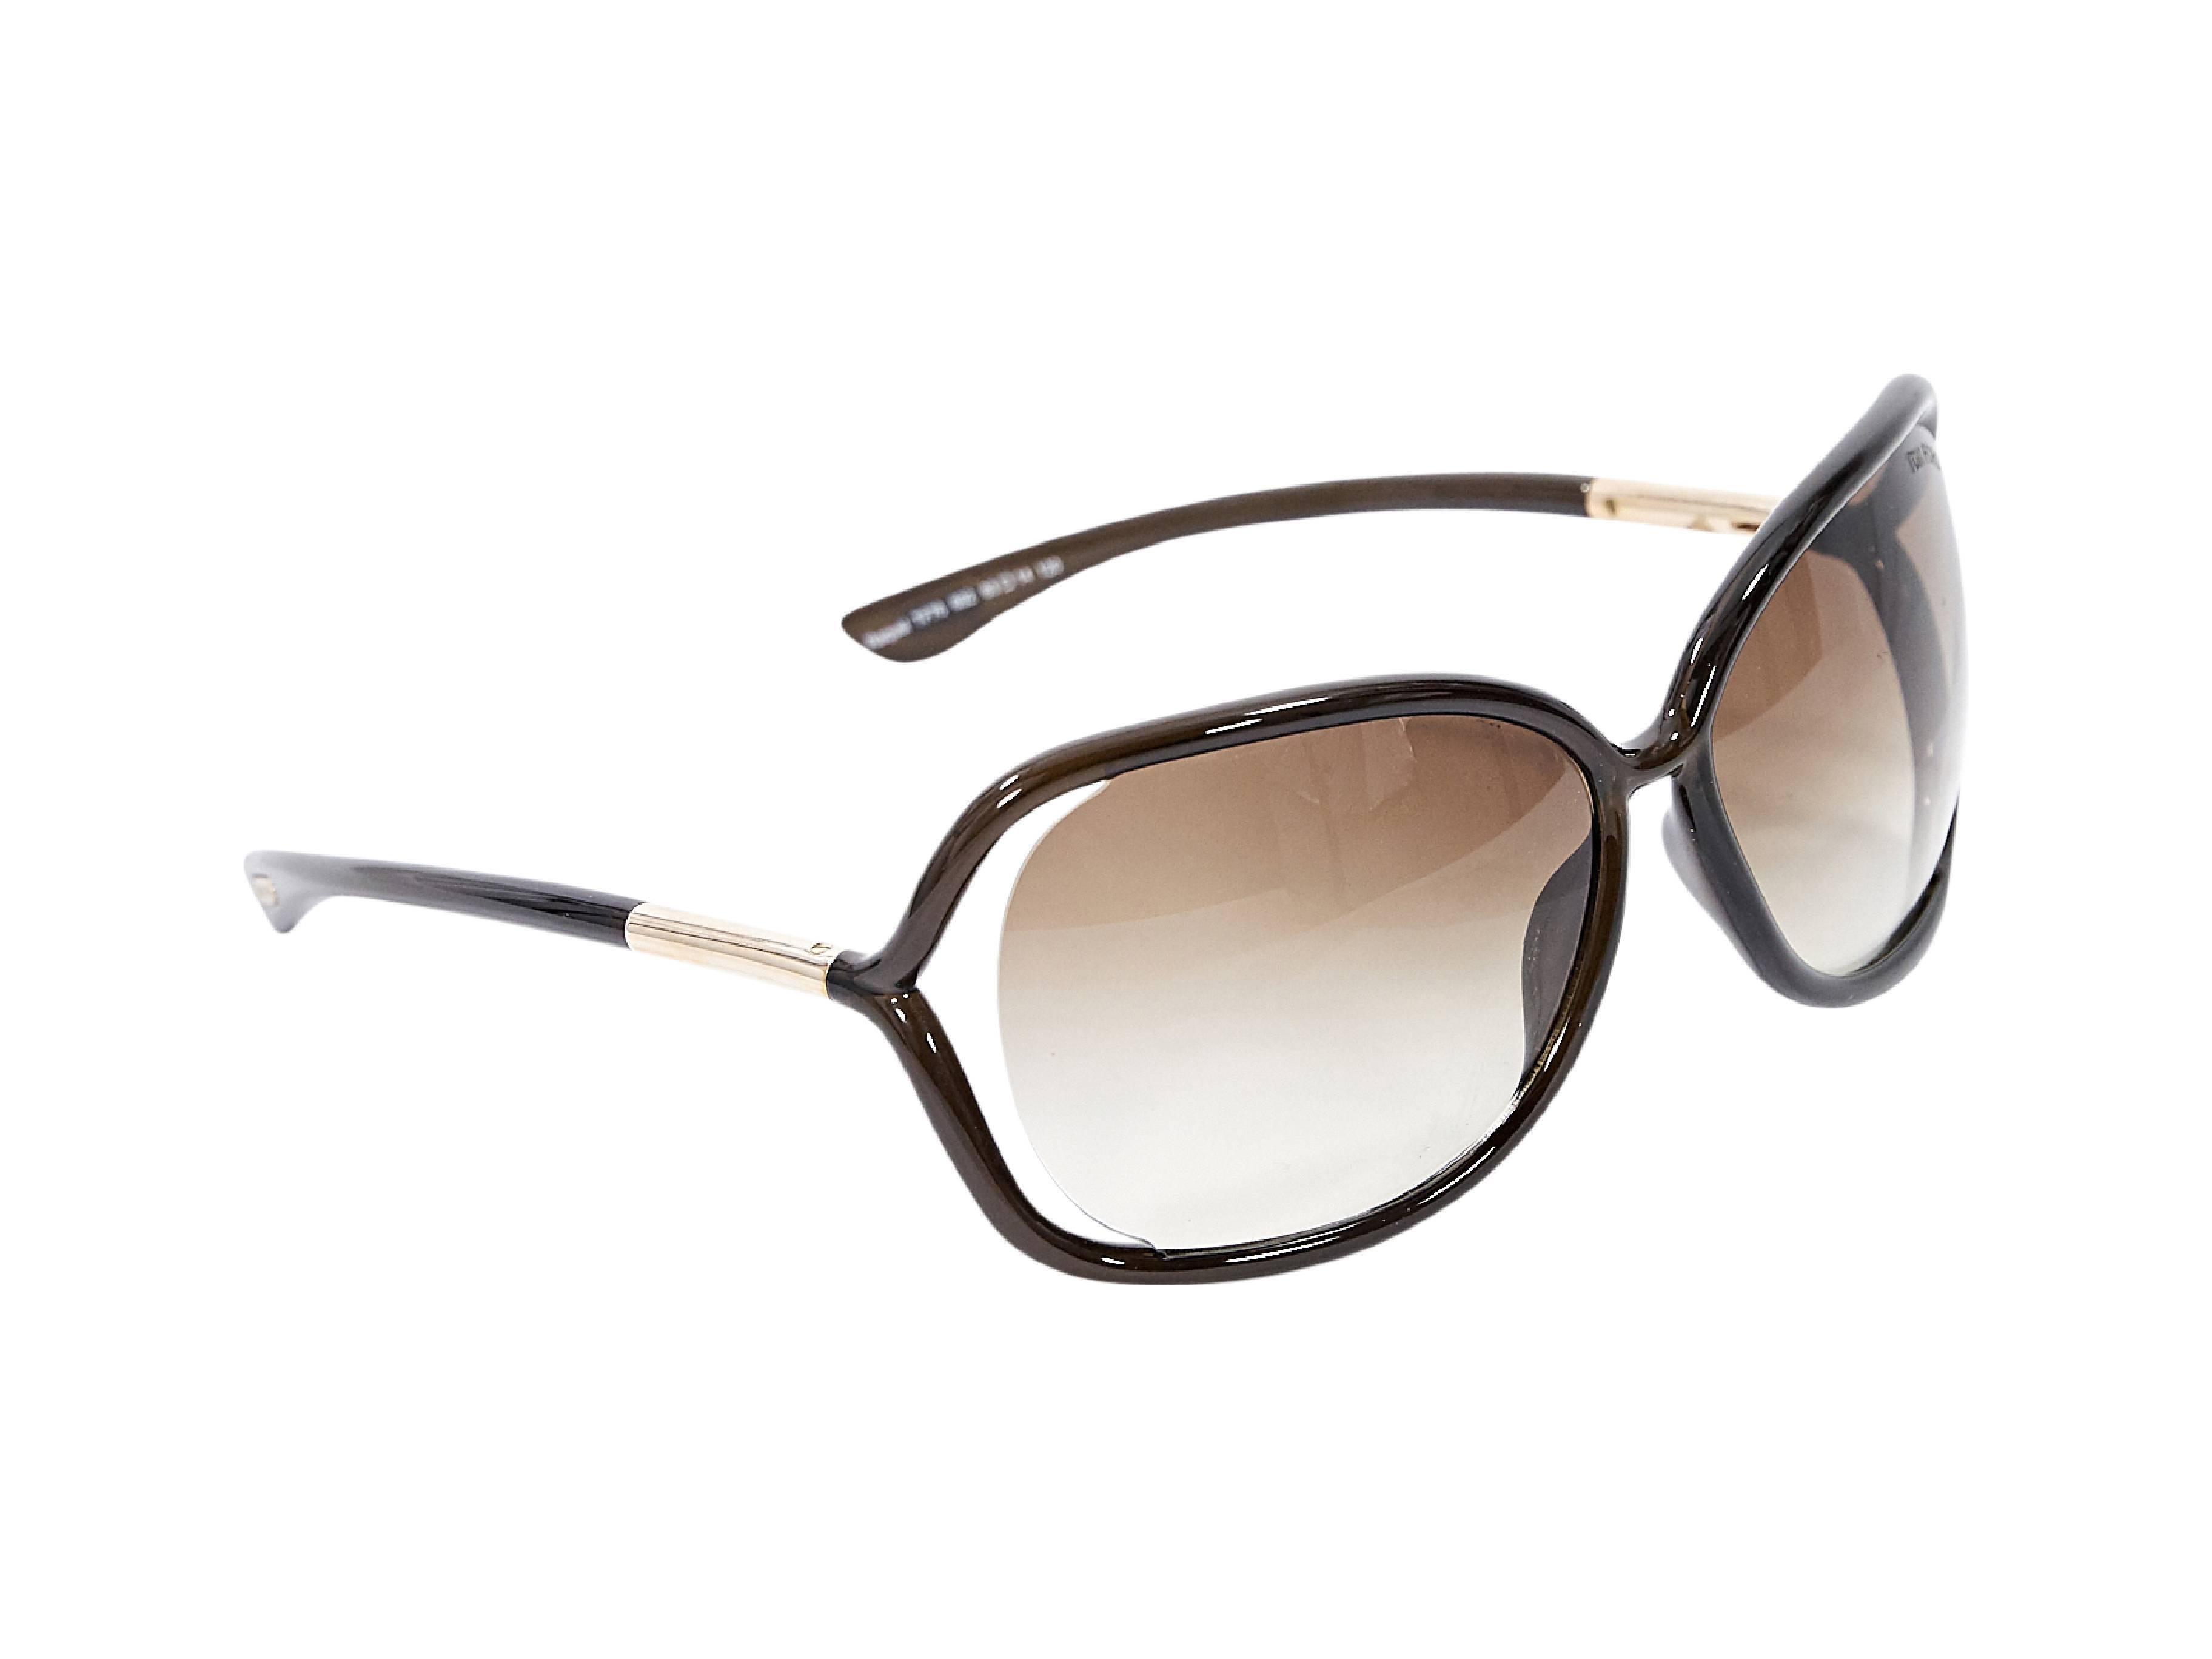 Product details:  Brown Raquel square sunglasses by Tom Ford.  Vented sides.  Gradient lenses.  Thin stems with goldtone hardware at temples. 
Condition: Pre-owned. Very good.

Est. Retail $ 598.00